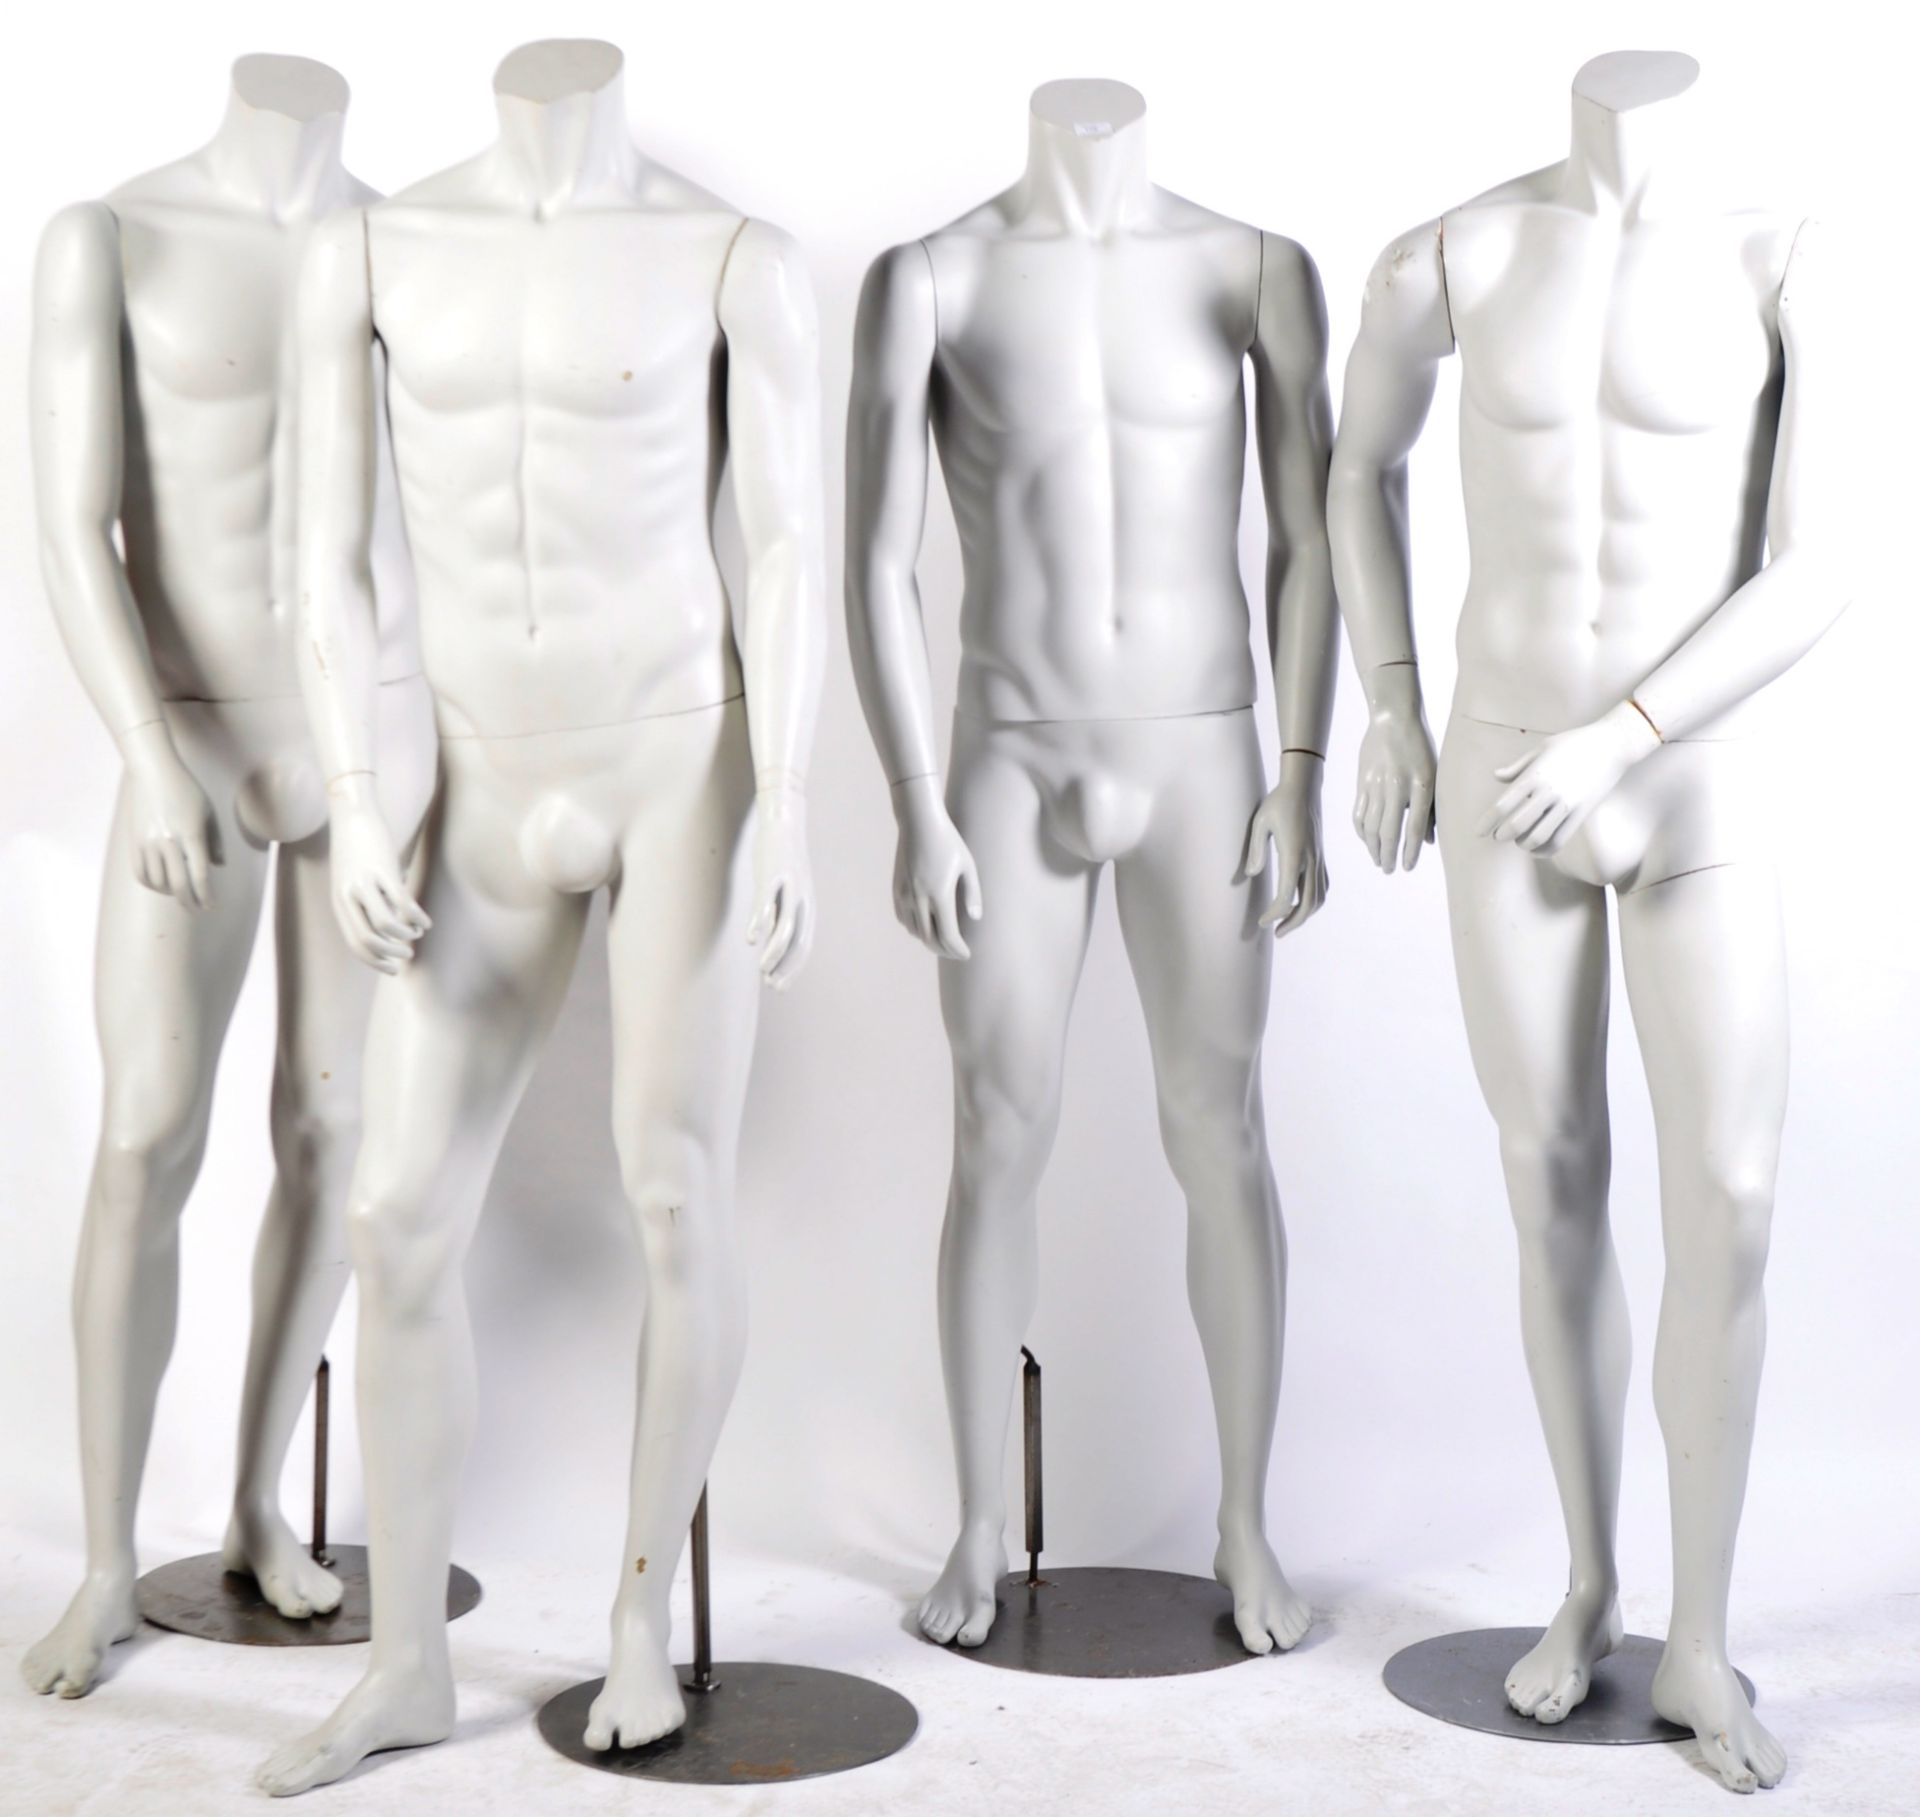 GROUP OF FIVE ADVERTISING POINT OF SALE MANNEQUINS - Image 2 of 2